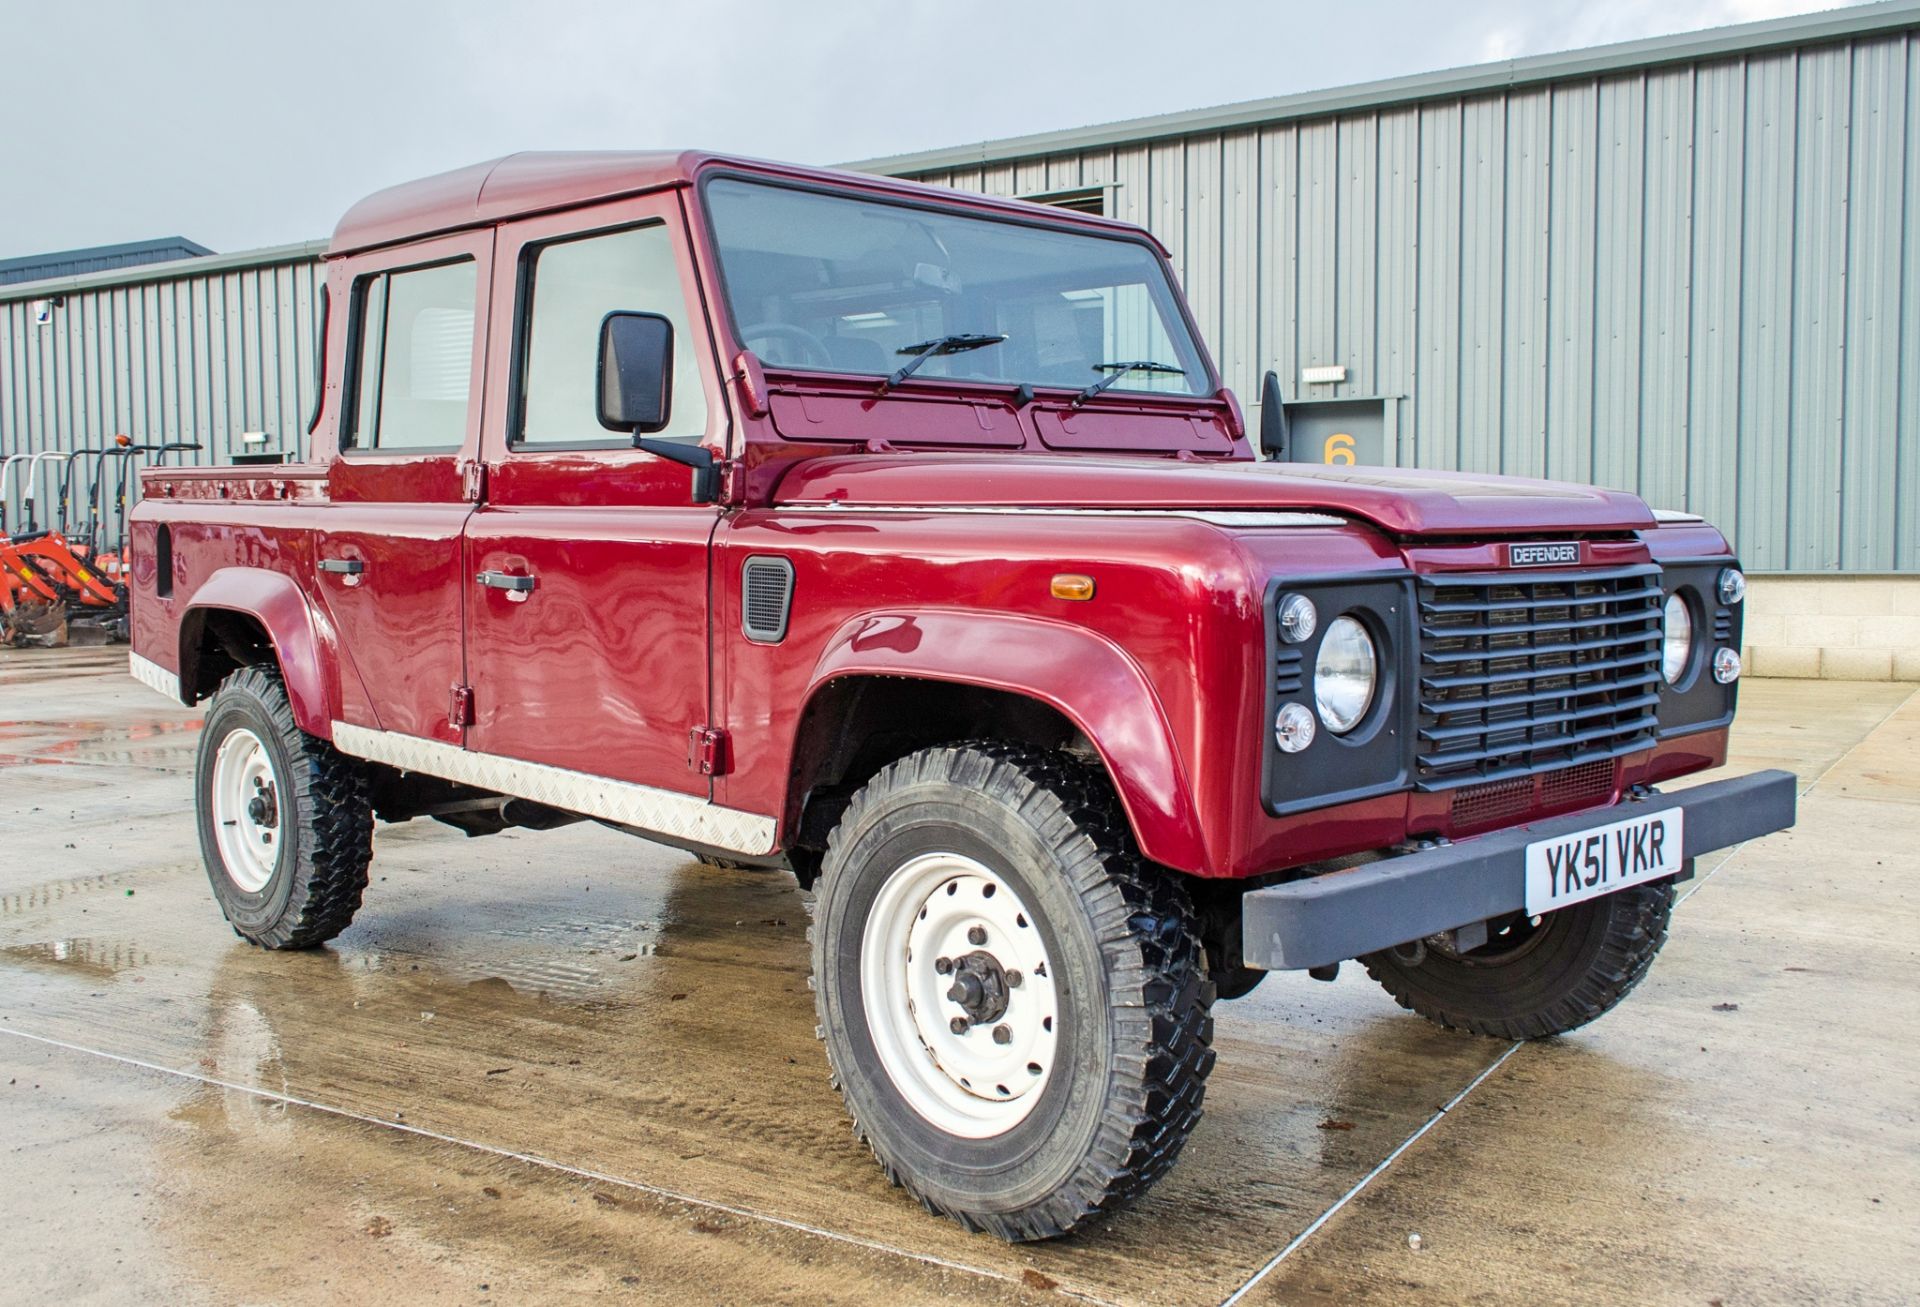 Land Rover Defender 110 County TD5 4x4 double cab pick up Registration Number: YK51 VKR Date of - Image 2 of 29